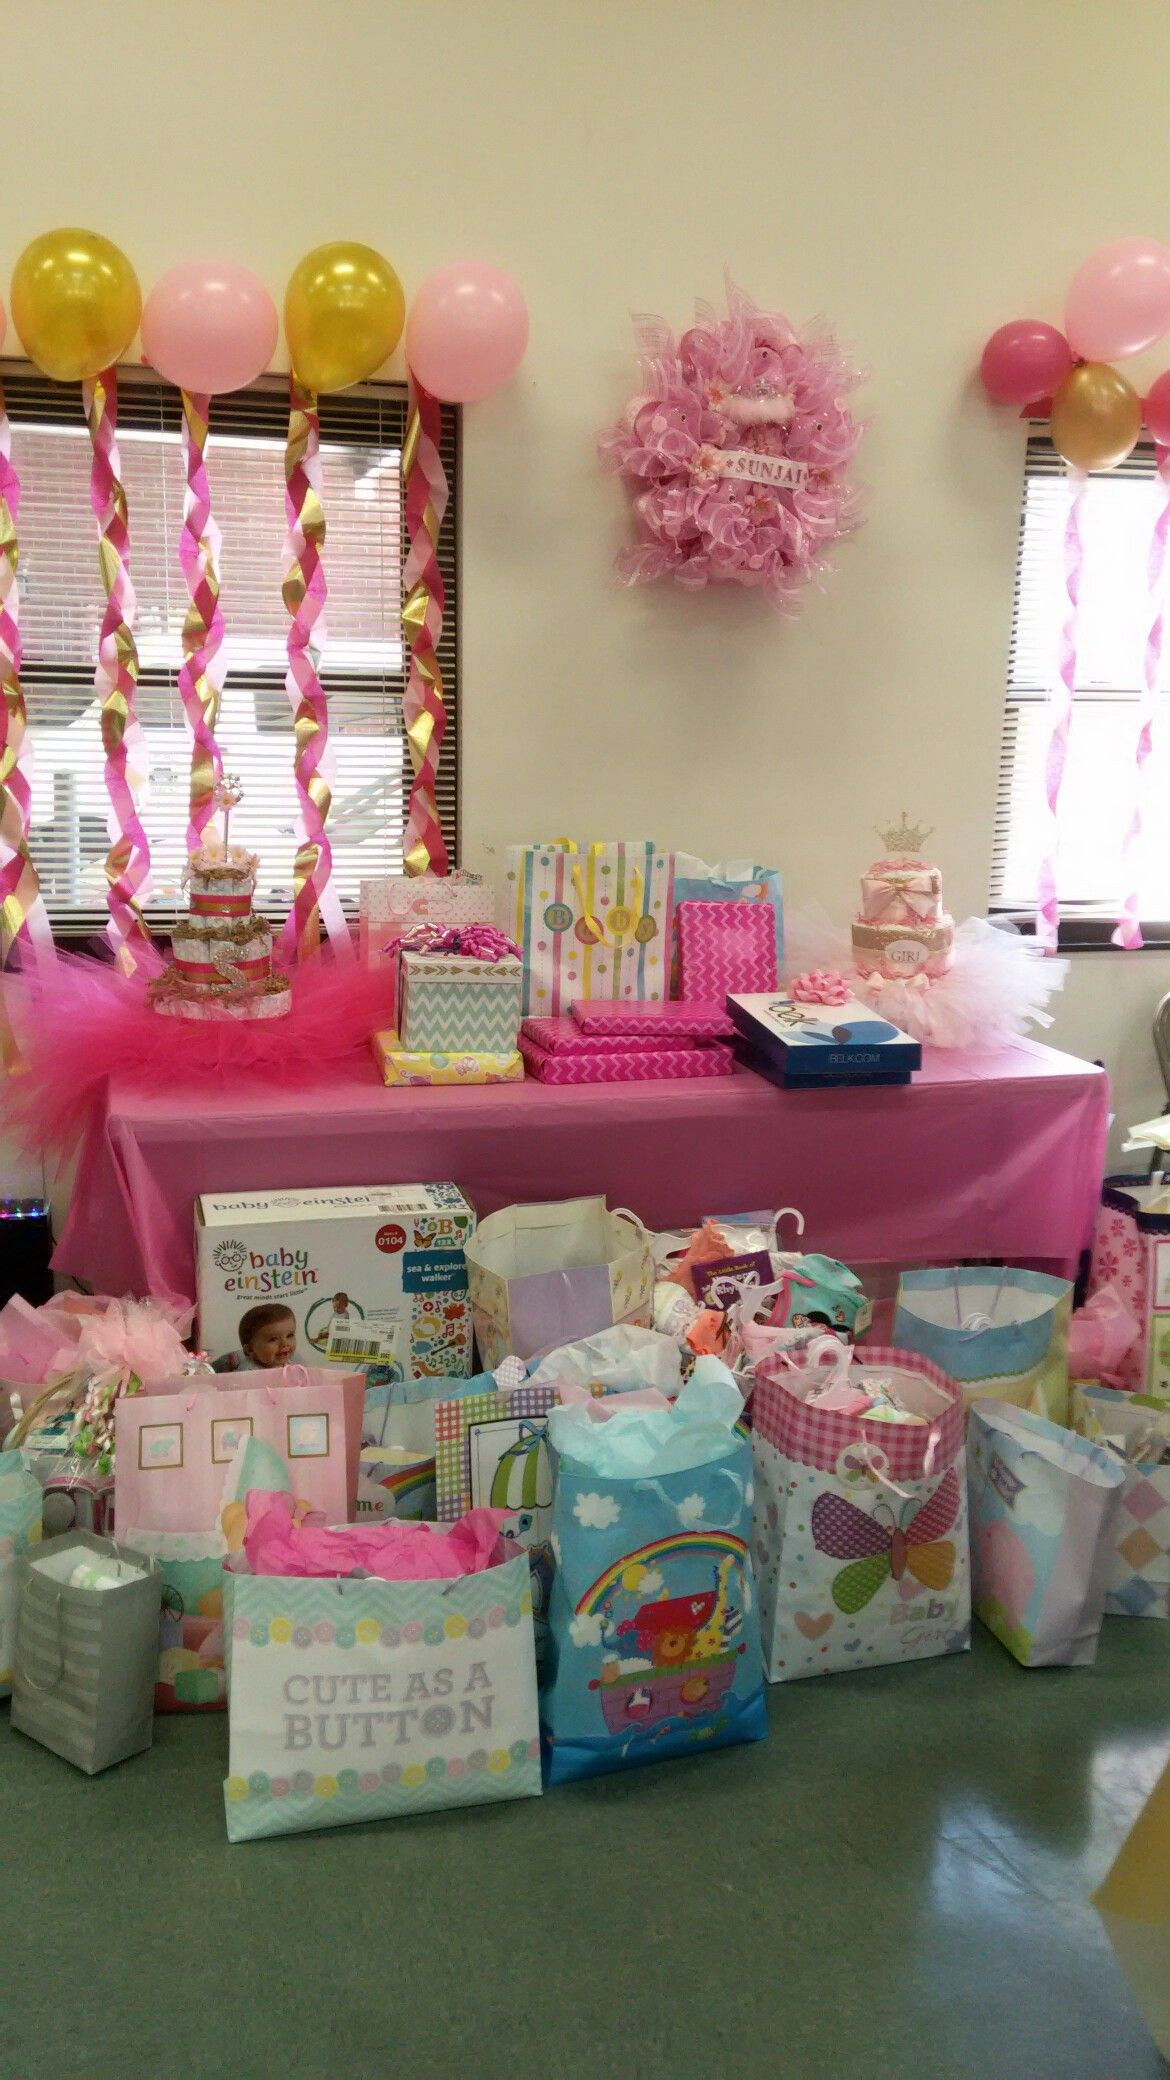 Decorating Ideas For Baby Shower Gift Table
 My niece s baby shower t table